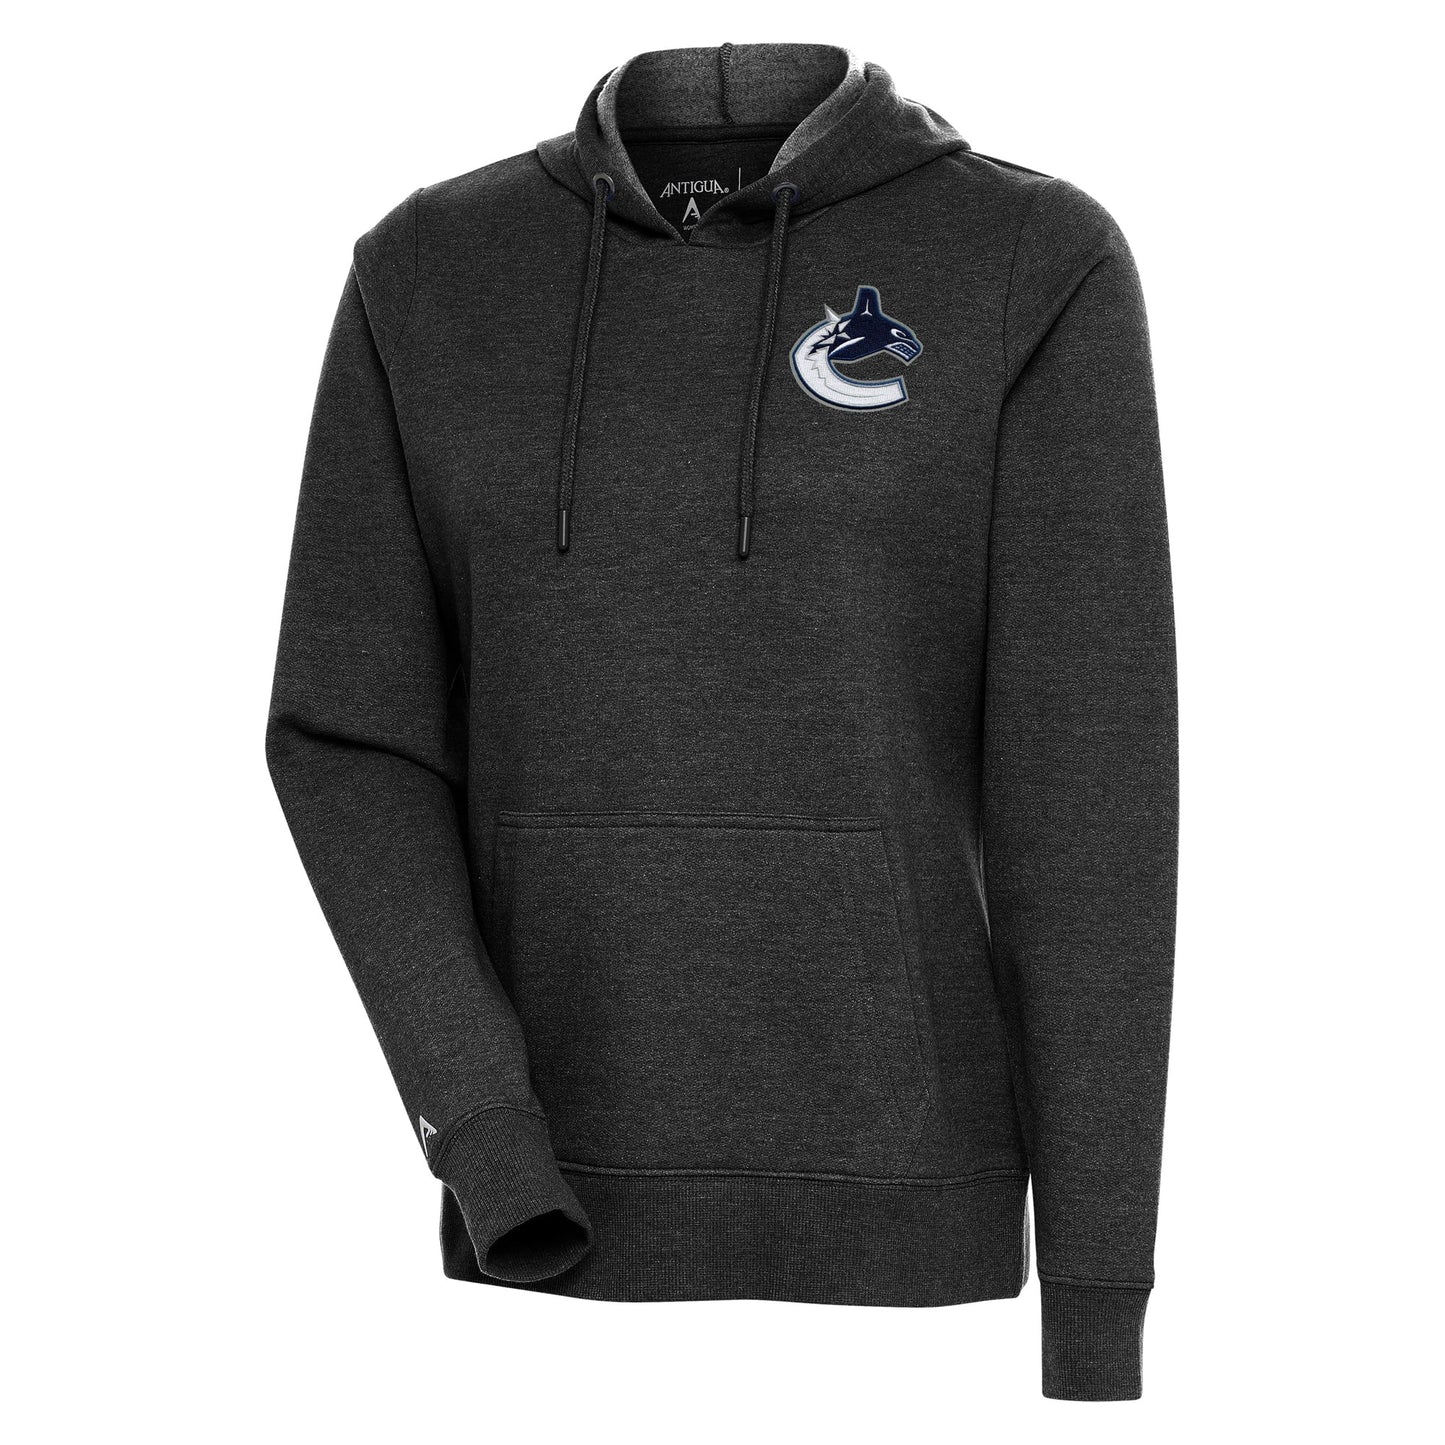 Women's Antigua Heather Black Vancouver Canucks Action Chenille Pullover Hoodie